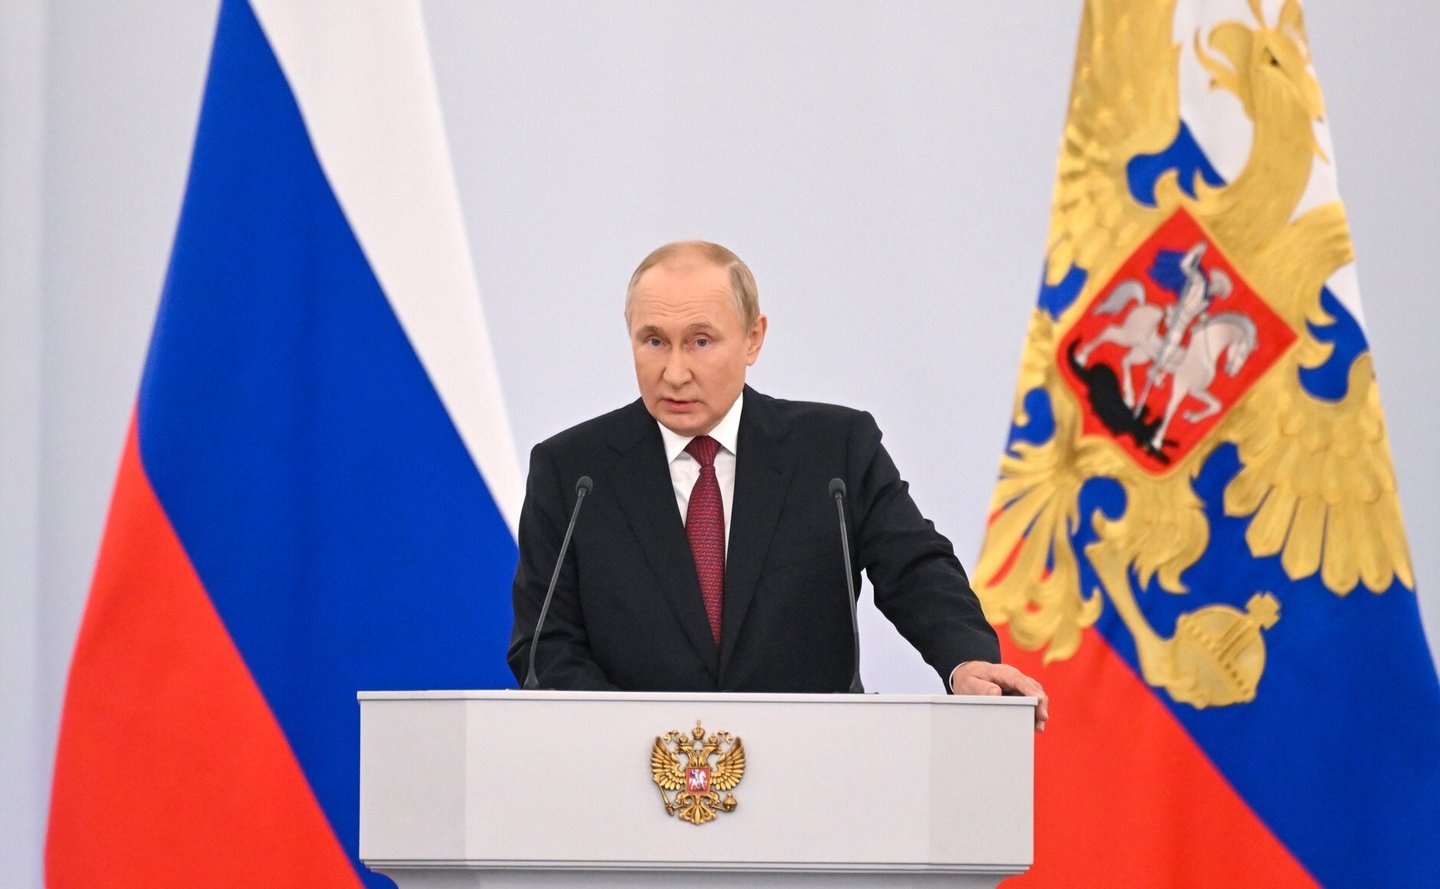 Putin launches ceremony for 'accession' of Ukraineâs 4 regions to Russia